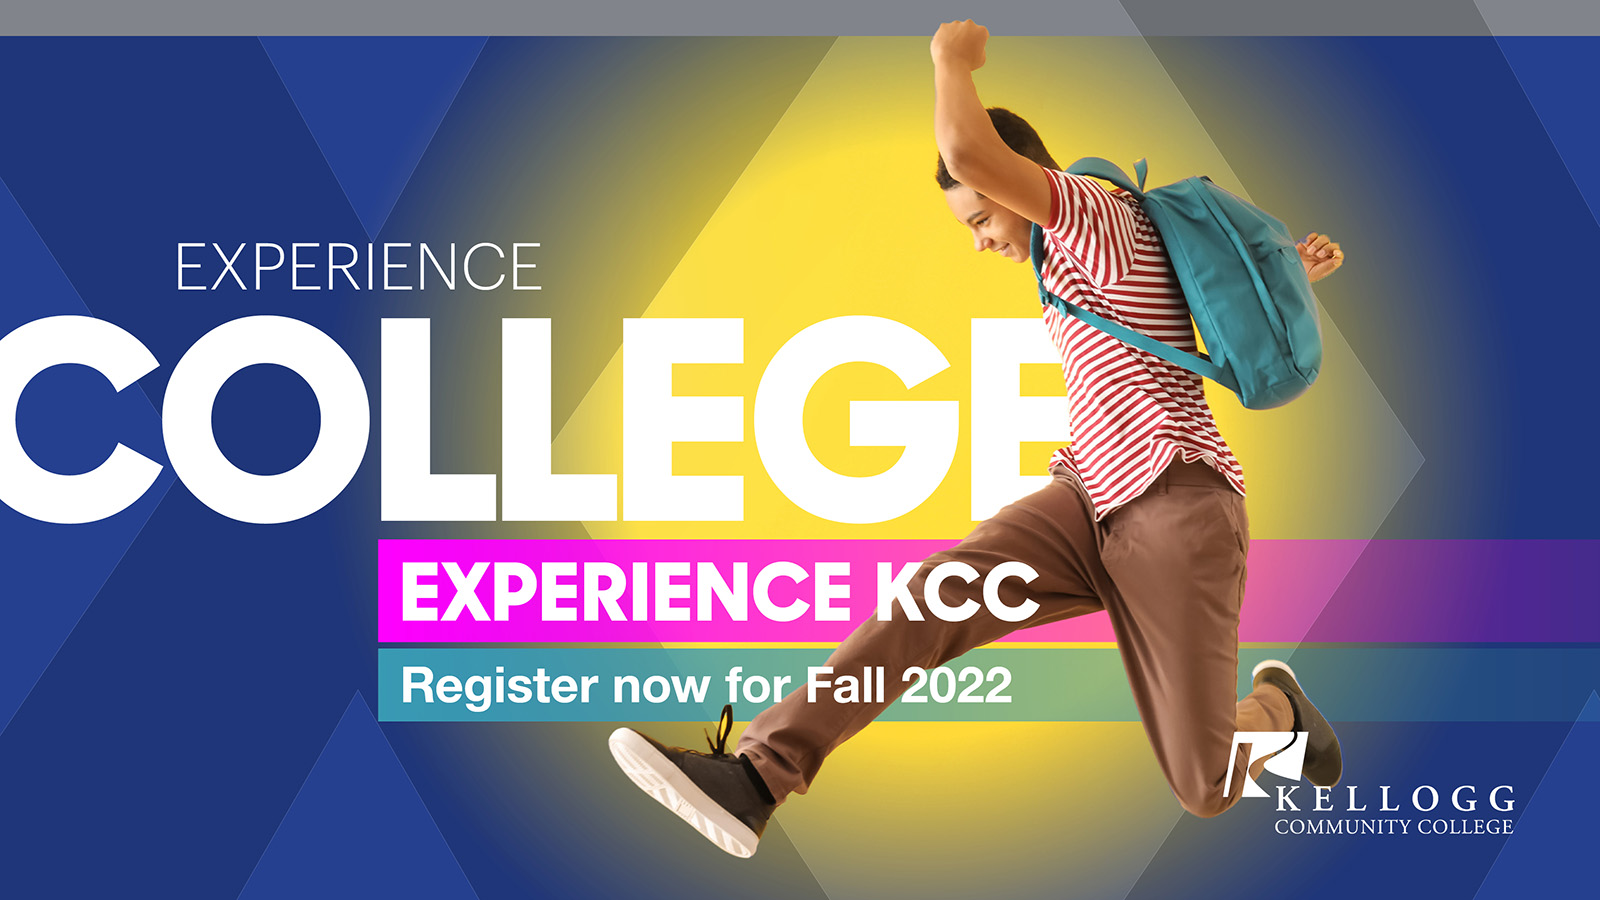 A student wearing a backpack jumps on a text slide that reads "Experience college. Experience KCC. Register for Fall 2022."